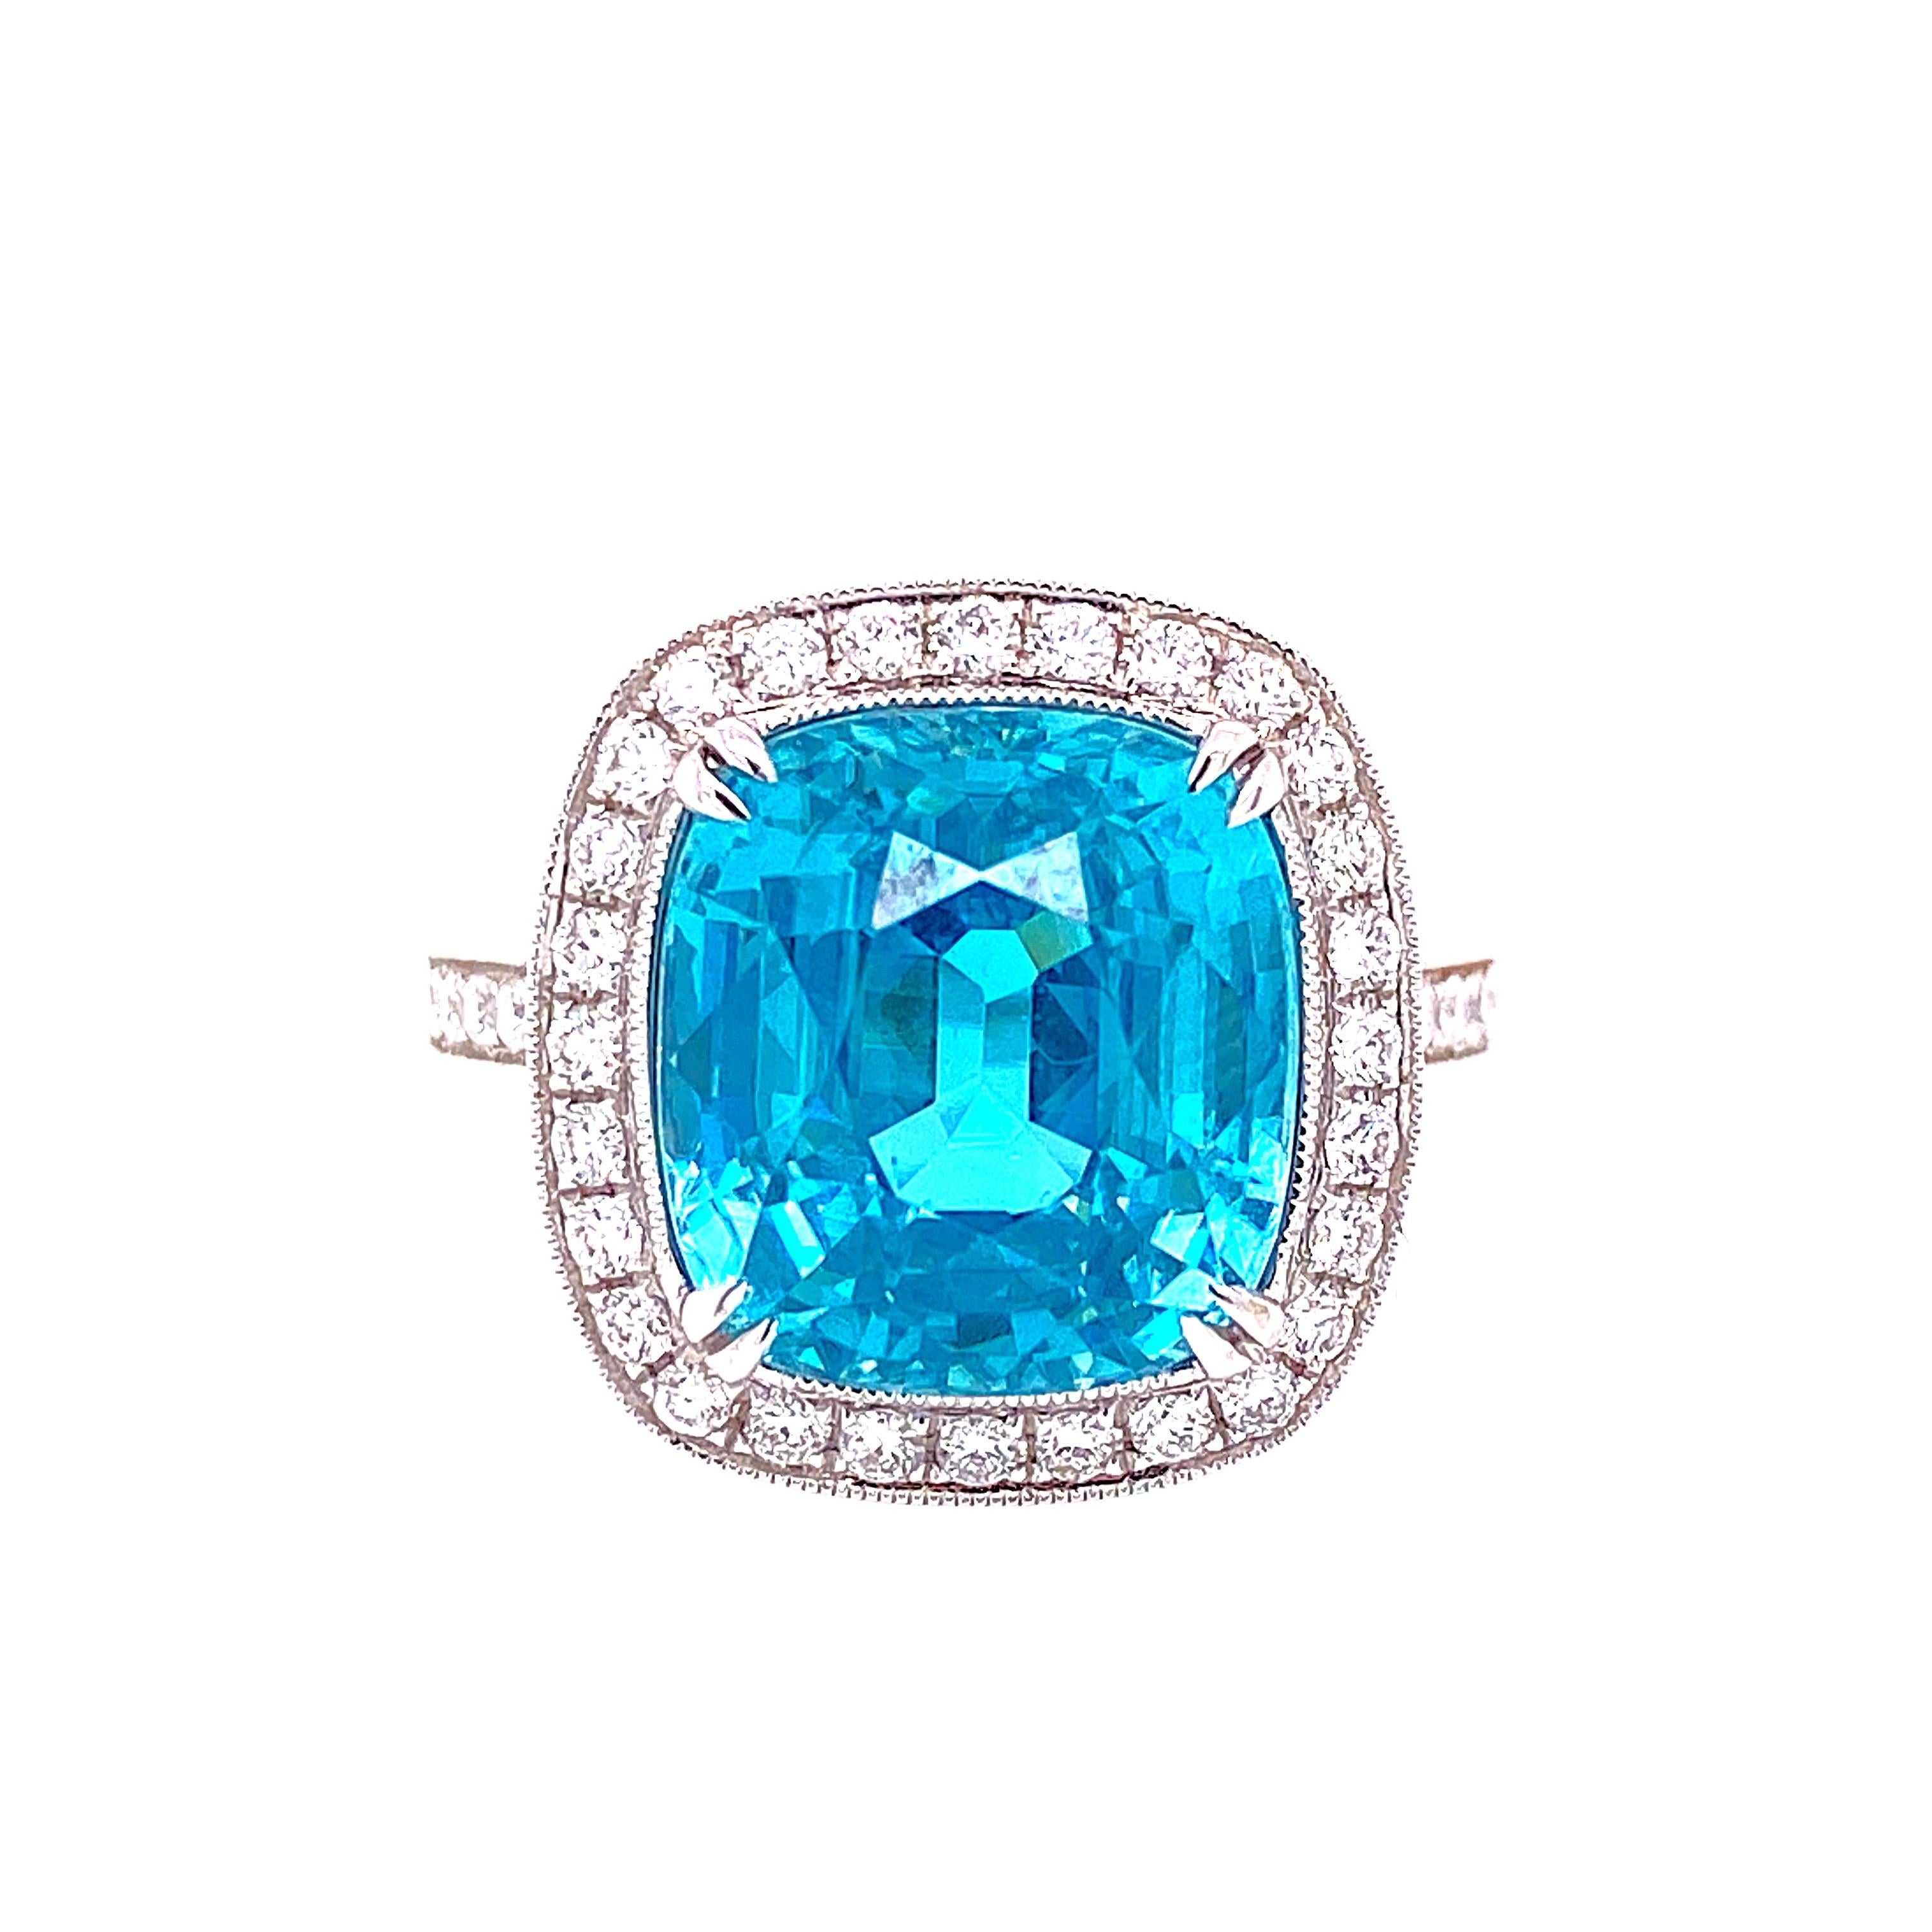 This stunning Cocktail Ring features a beautiful 10.50 Carat Cushion Blue Zircon with a Diamond Halo, on a Diamond Shank. This ring is set in 18K White Gold. Total Diamond Weight = 0.47 carats. Ring Size is 6 1/2.